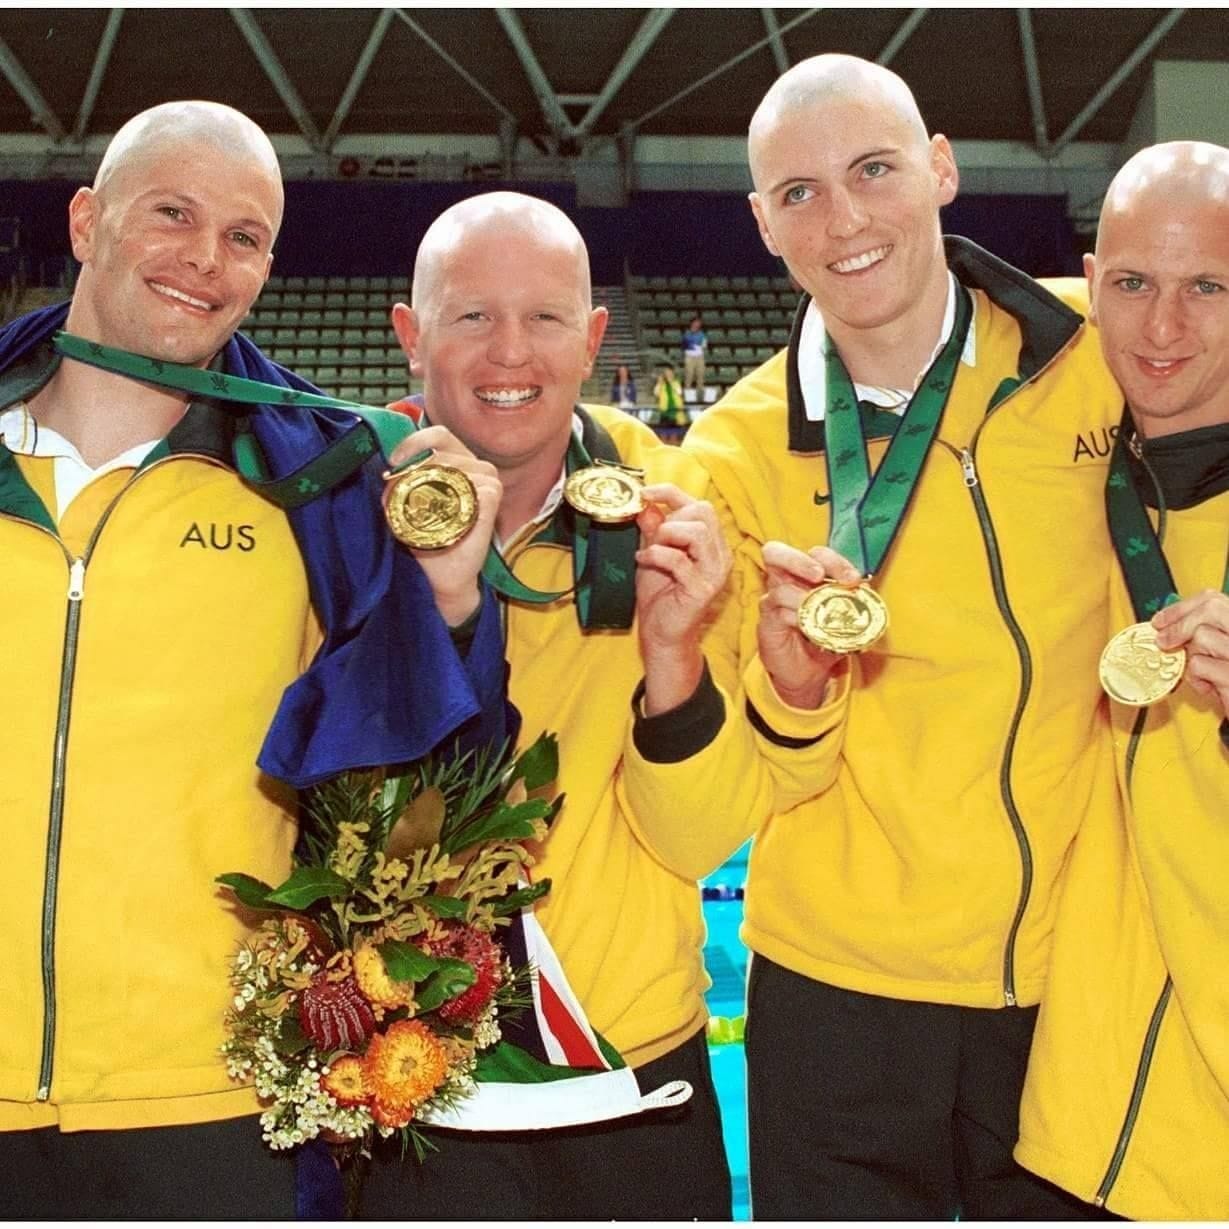 Image: Patrick Donachie, OAM (second from the right), won Gold at the Sydney 2000 Paralympic Games.